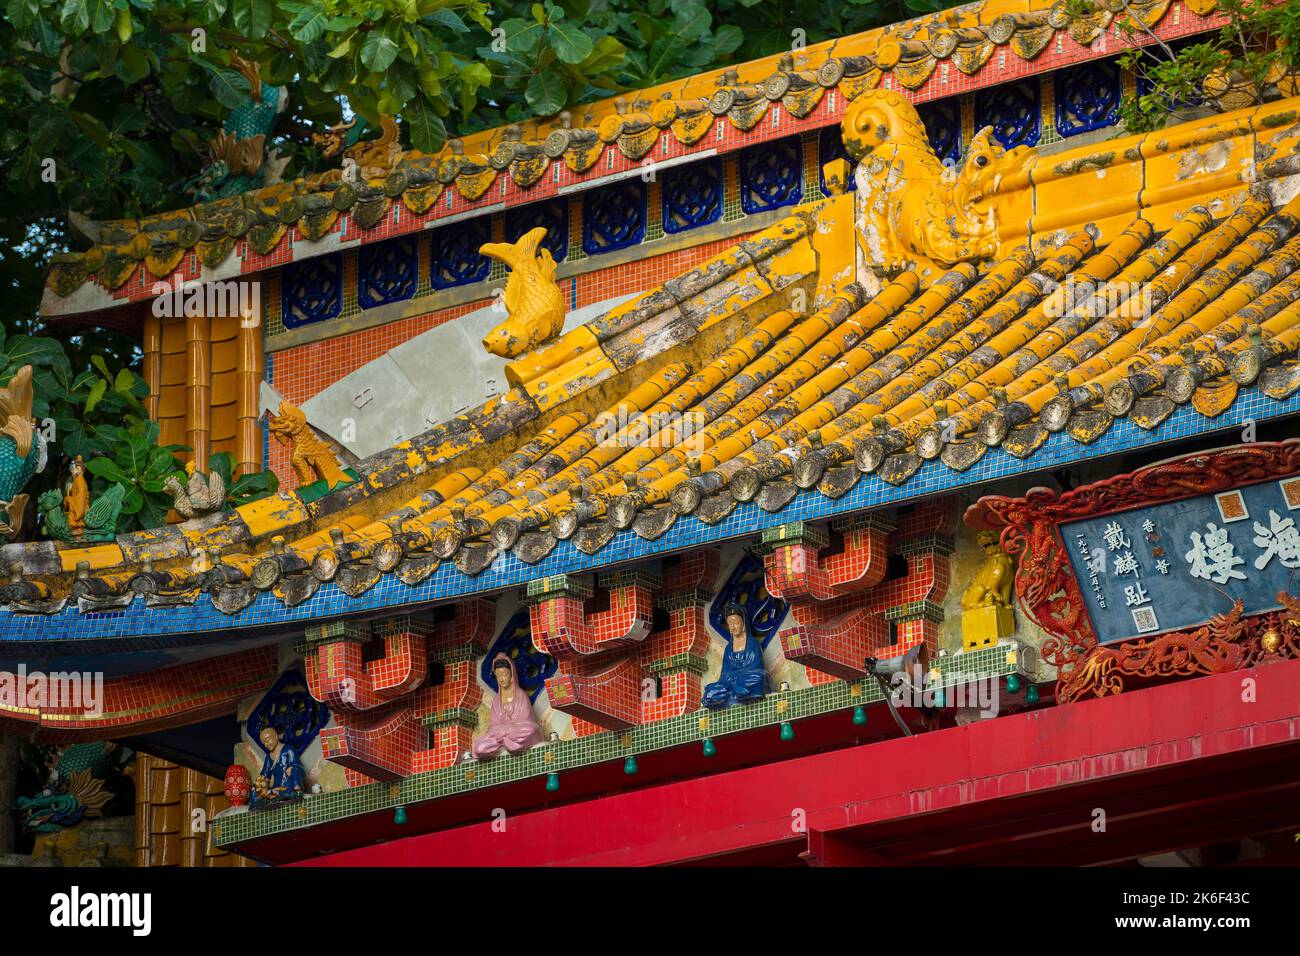 Detail of the decoration and statuary of the waterfront pavilion at the Tin Hau Temple, Repulse Bay, Hong Kong Island Stock Photo